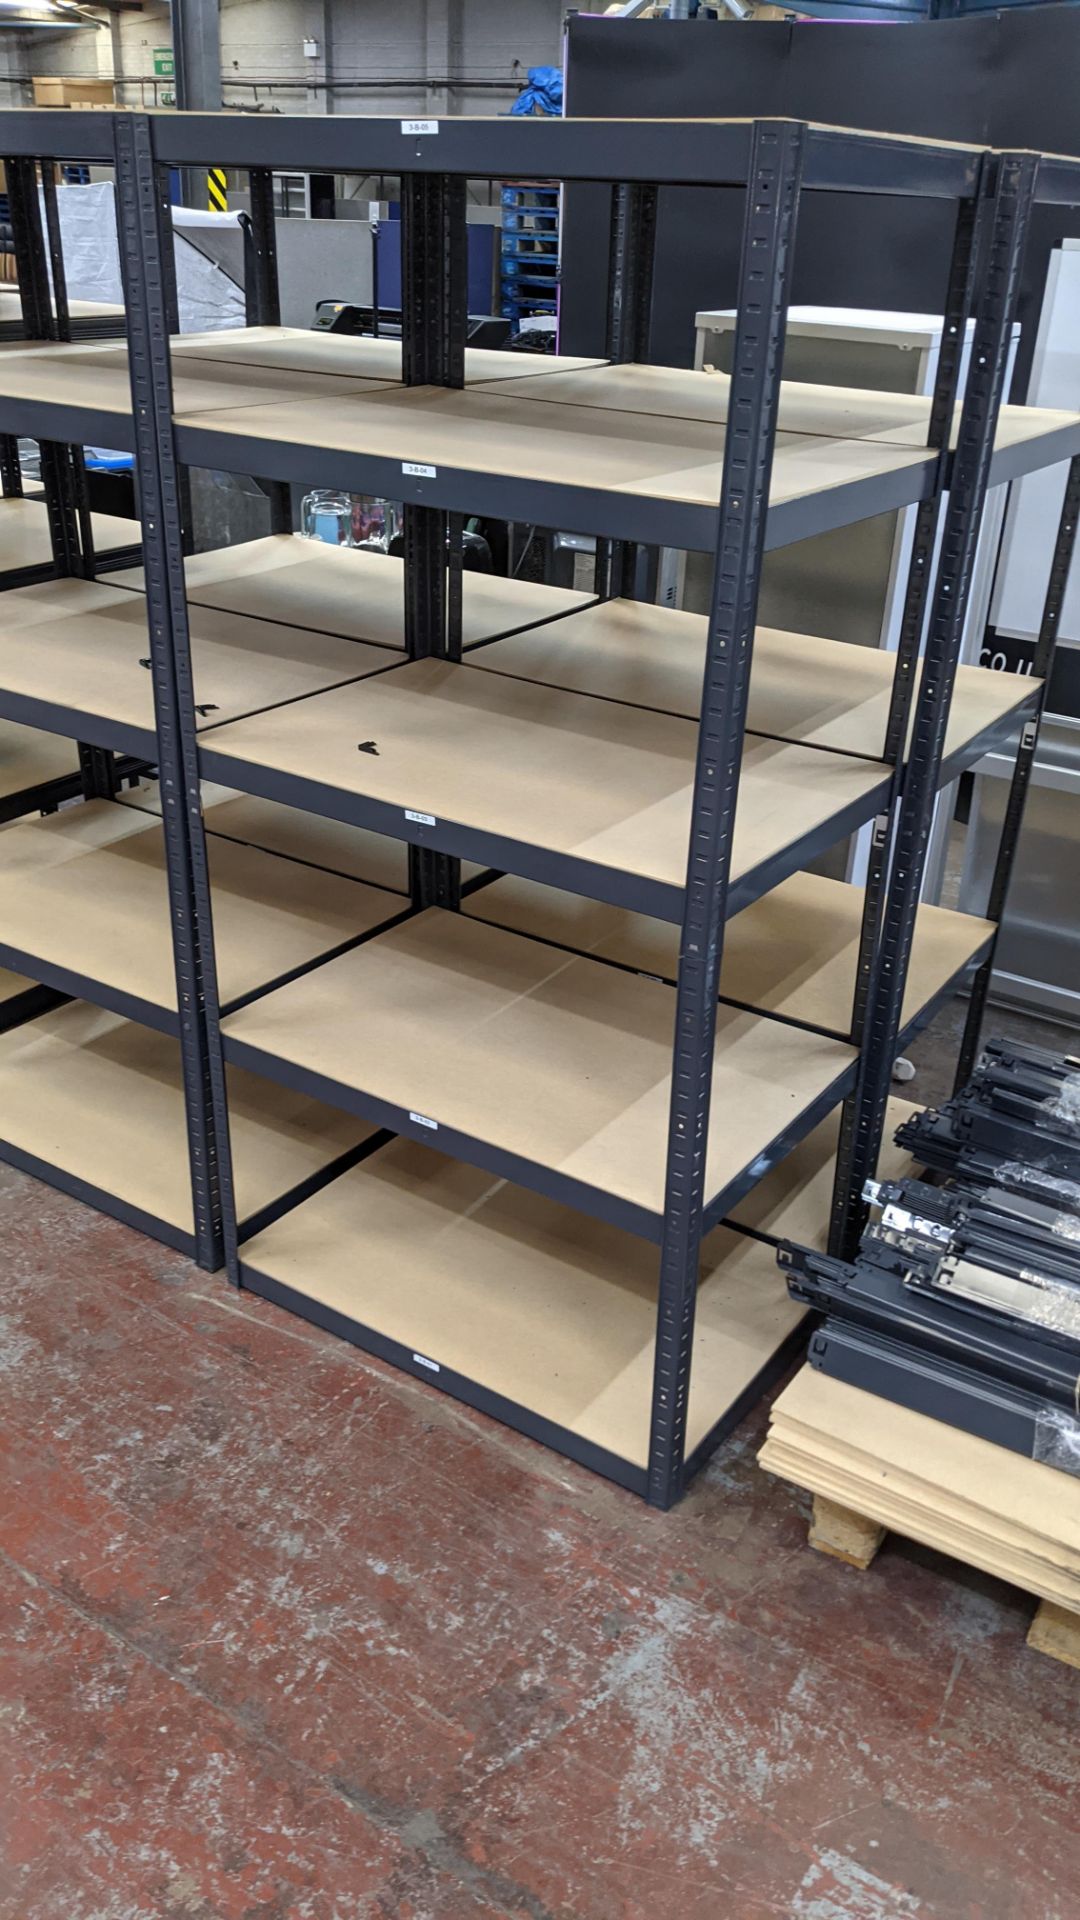 4 freestanding bays of bolt-free racking, each bay measuring approximately 900mm x 600mm x 1800mm, e - Image 5 of 7